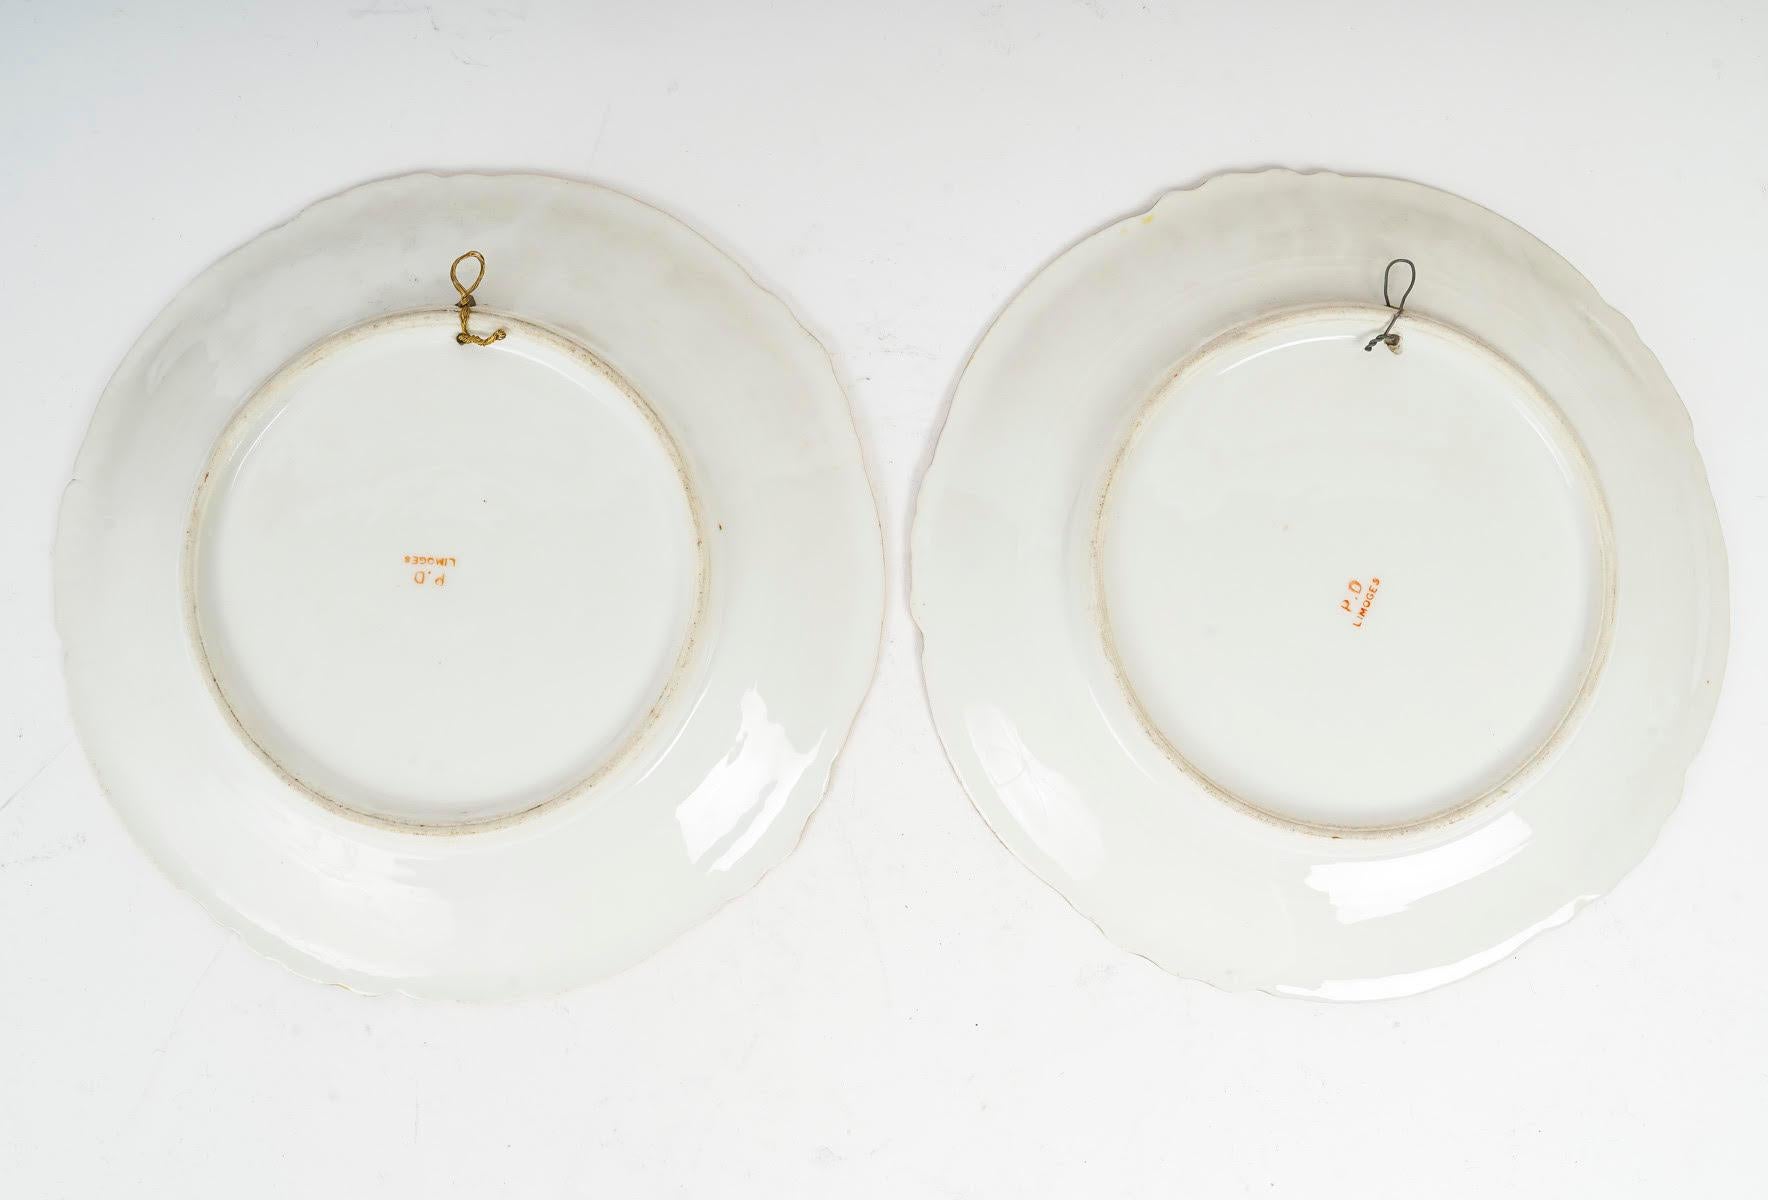 Pair of Decorative Plates in Limoges Porcelain, Napoleon III Period. 3